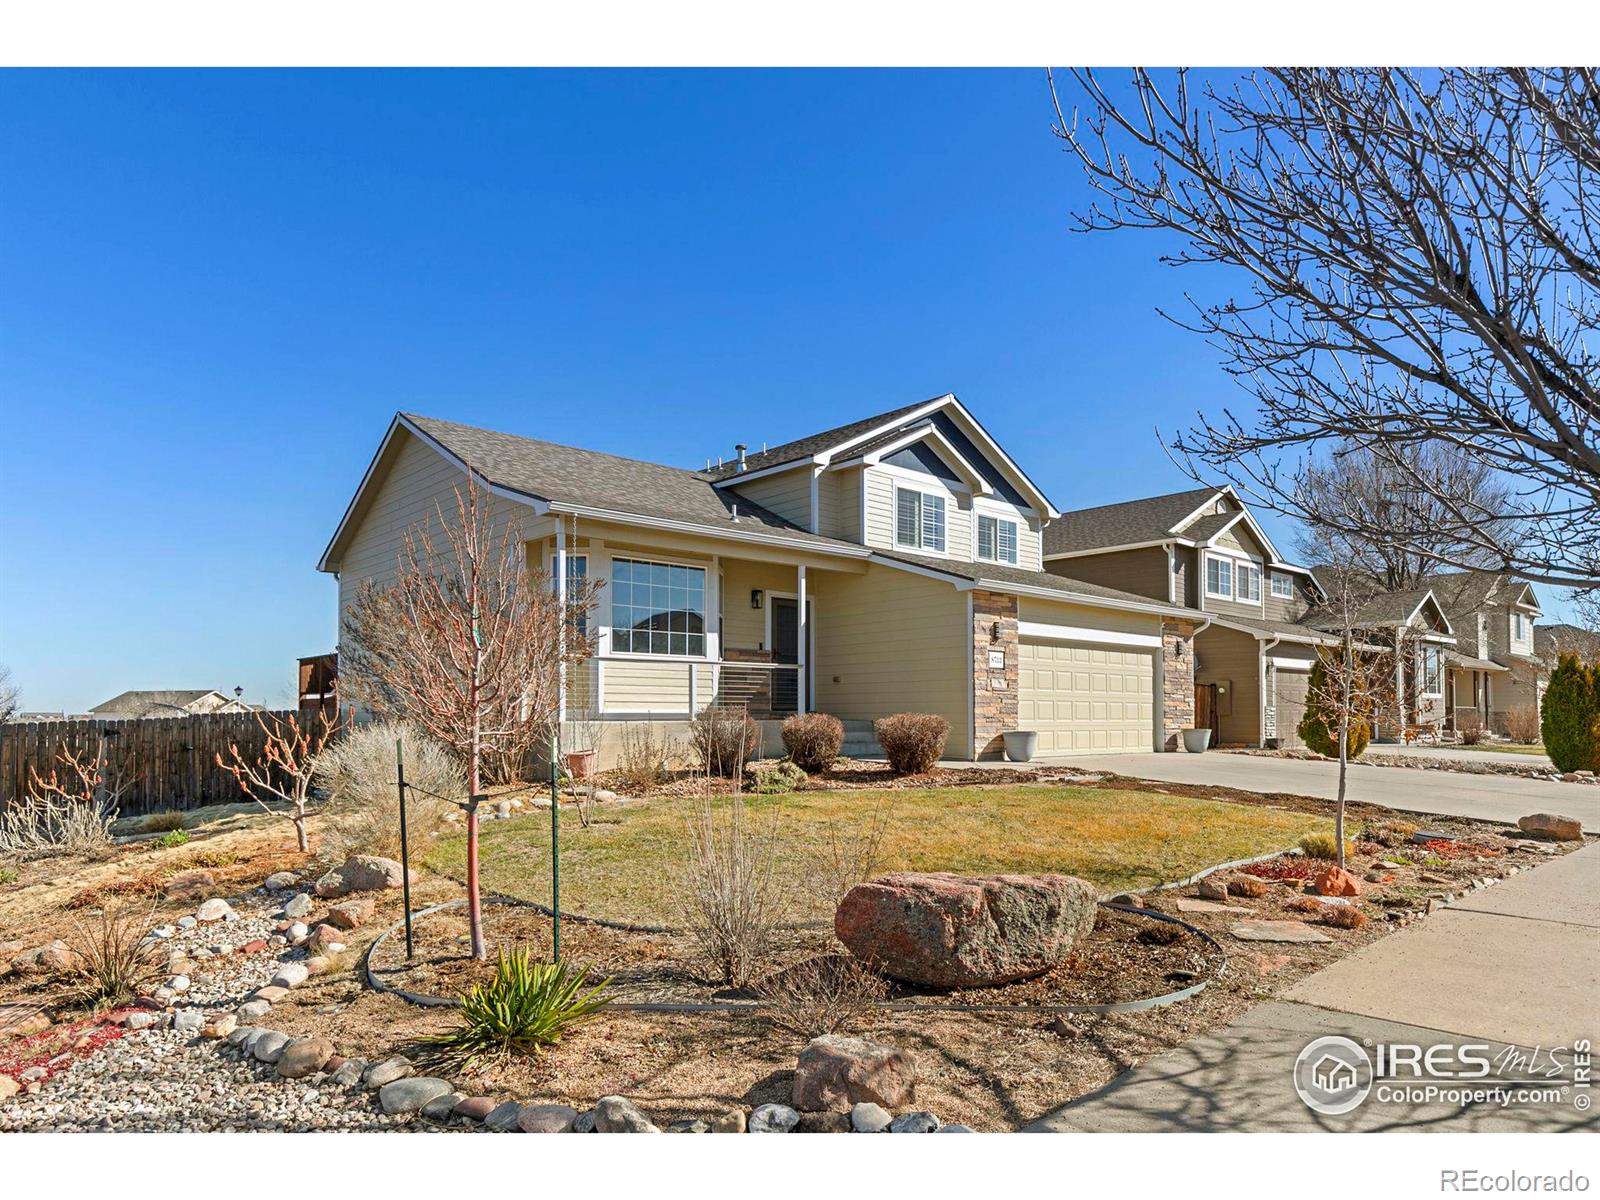 8733  19th st rd, Greeley sold home. Closed on 2024-04-29 for $441,000.